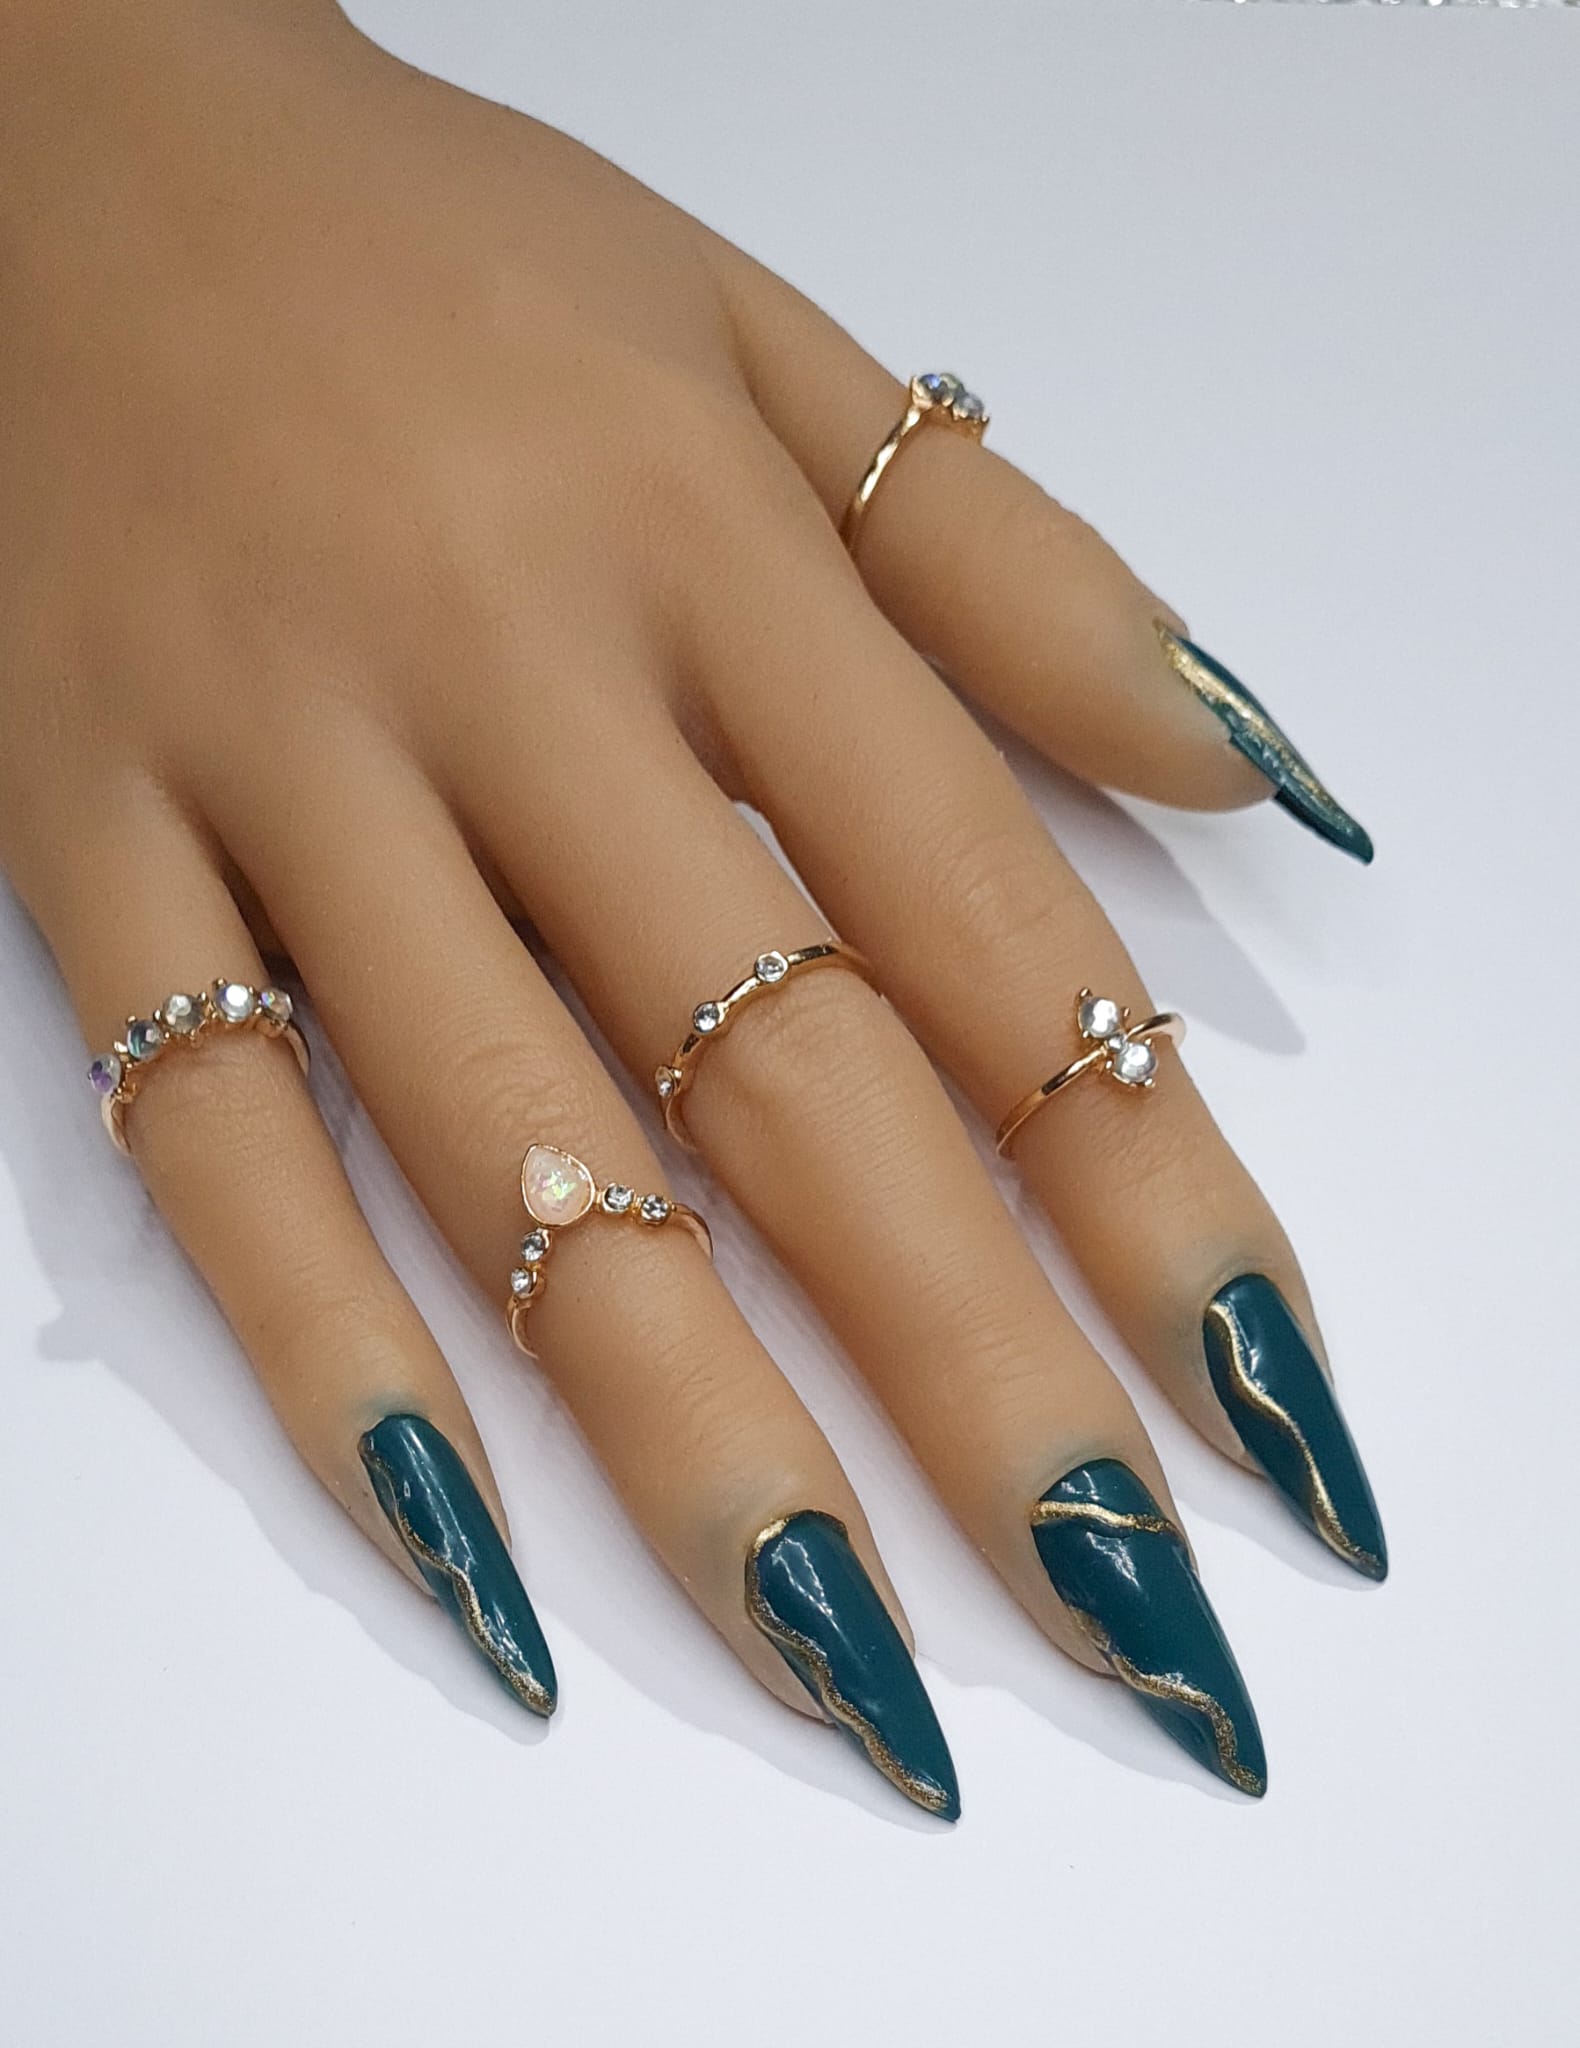 Press On Nails- Stiletto Shaped Emerald Green and Gold accent sexy spring summer collection full cover gel tip luxury false nails salon quality hand painted custom made uk